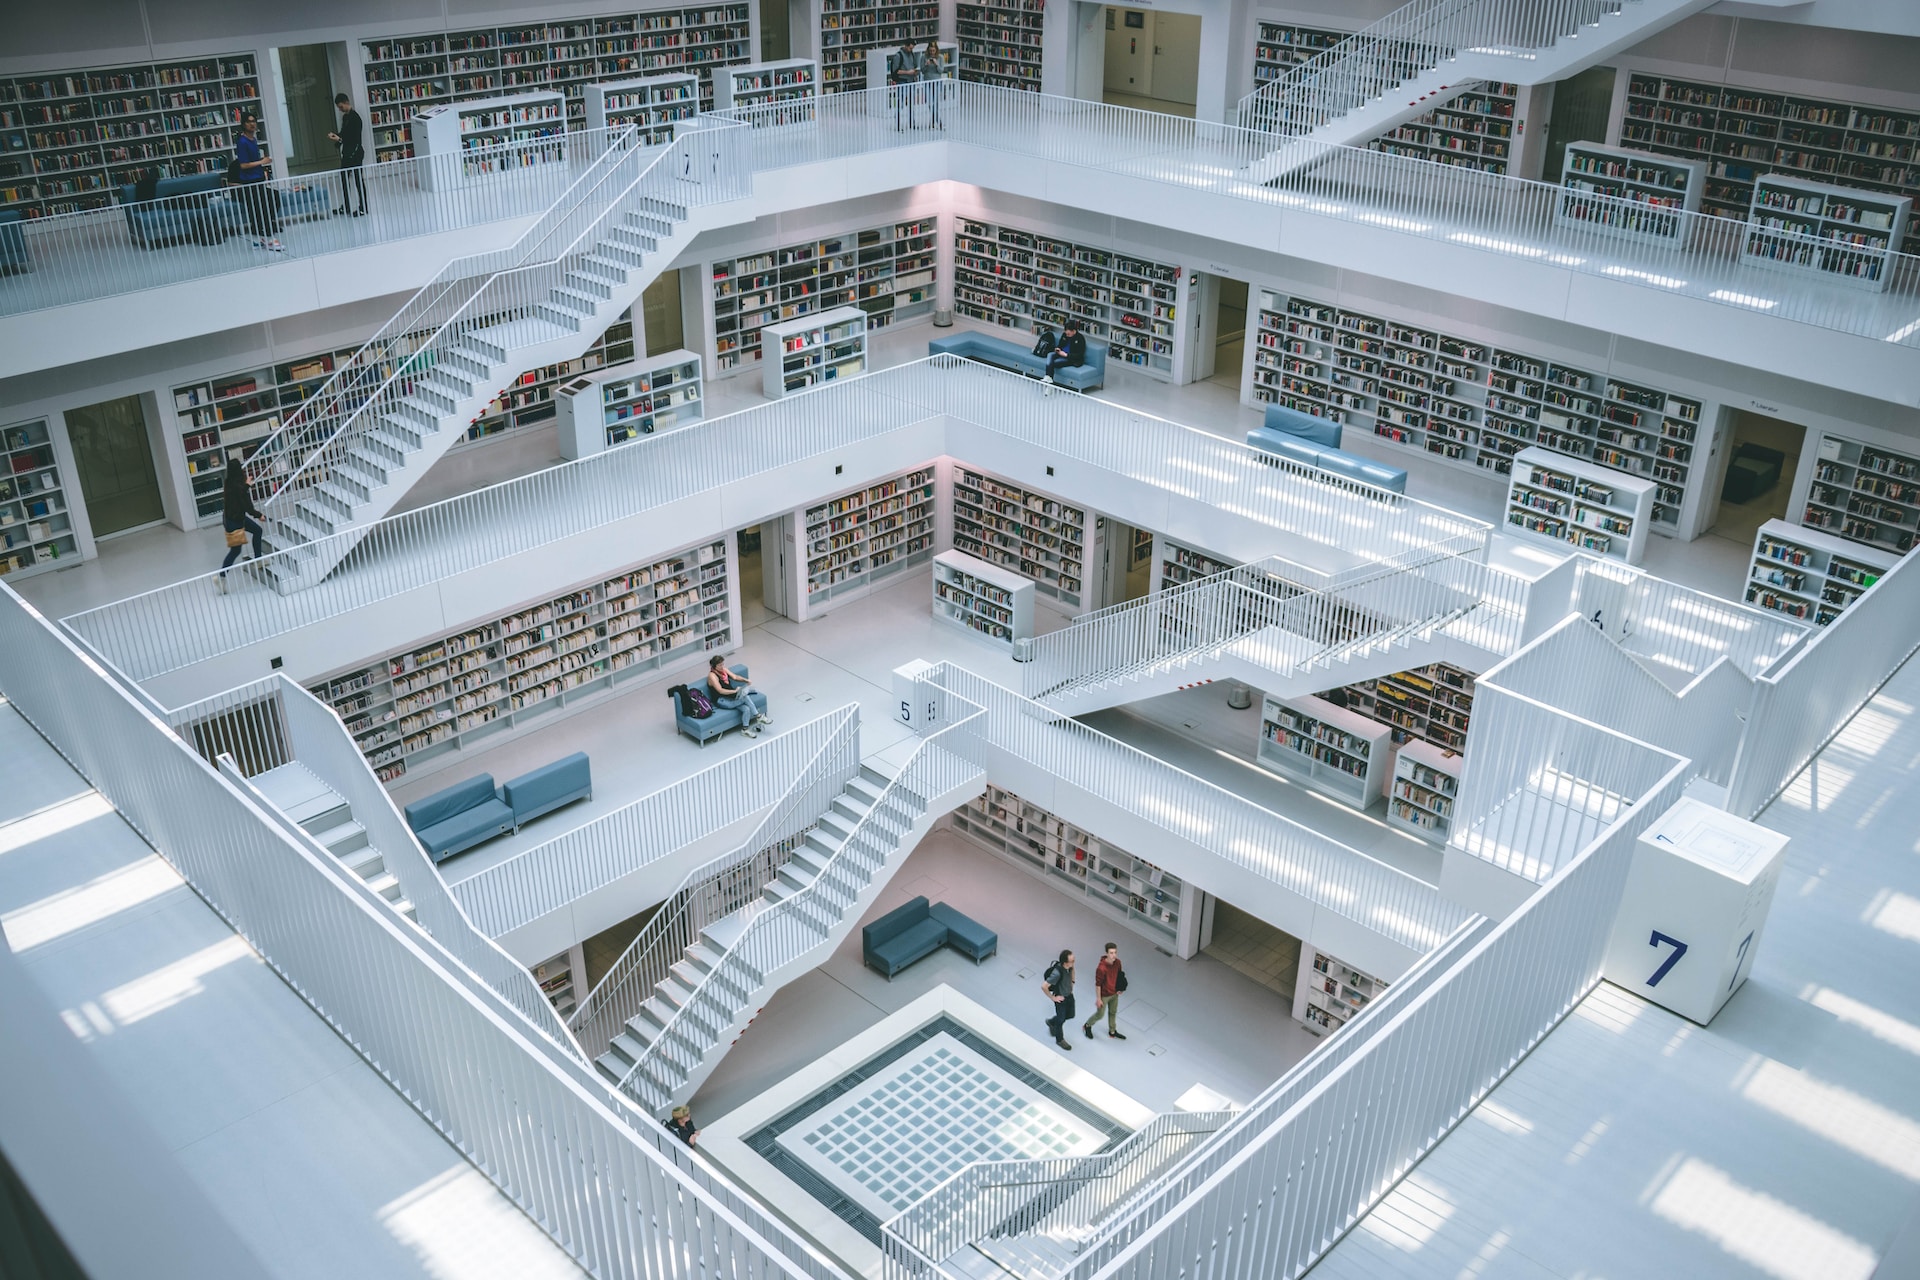 All About Libraries